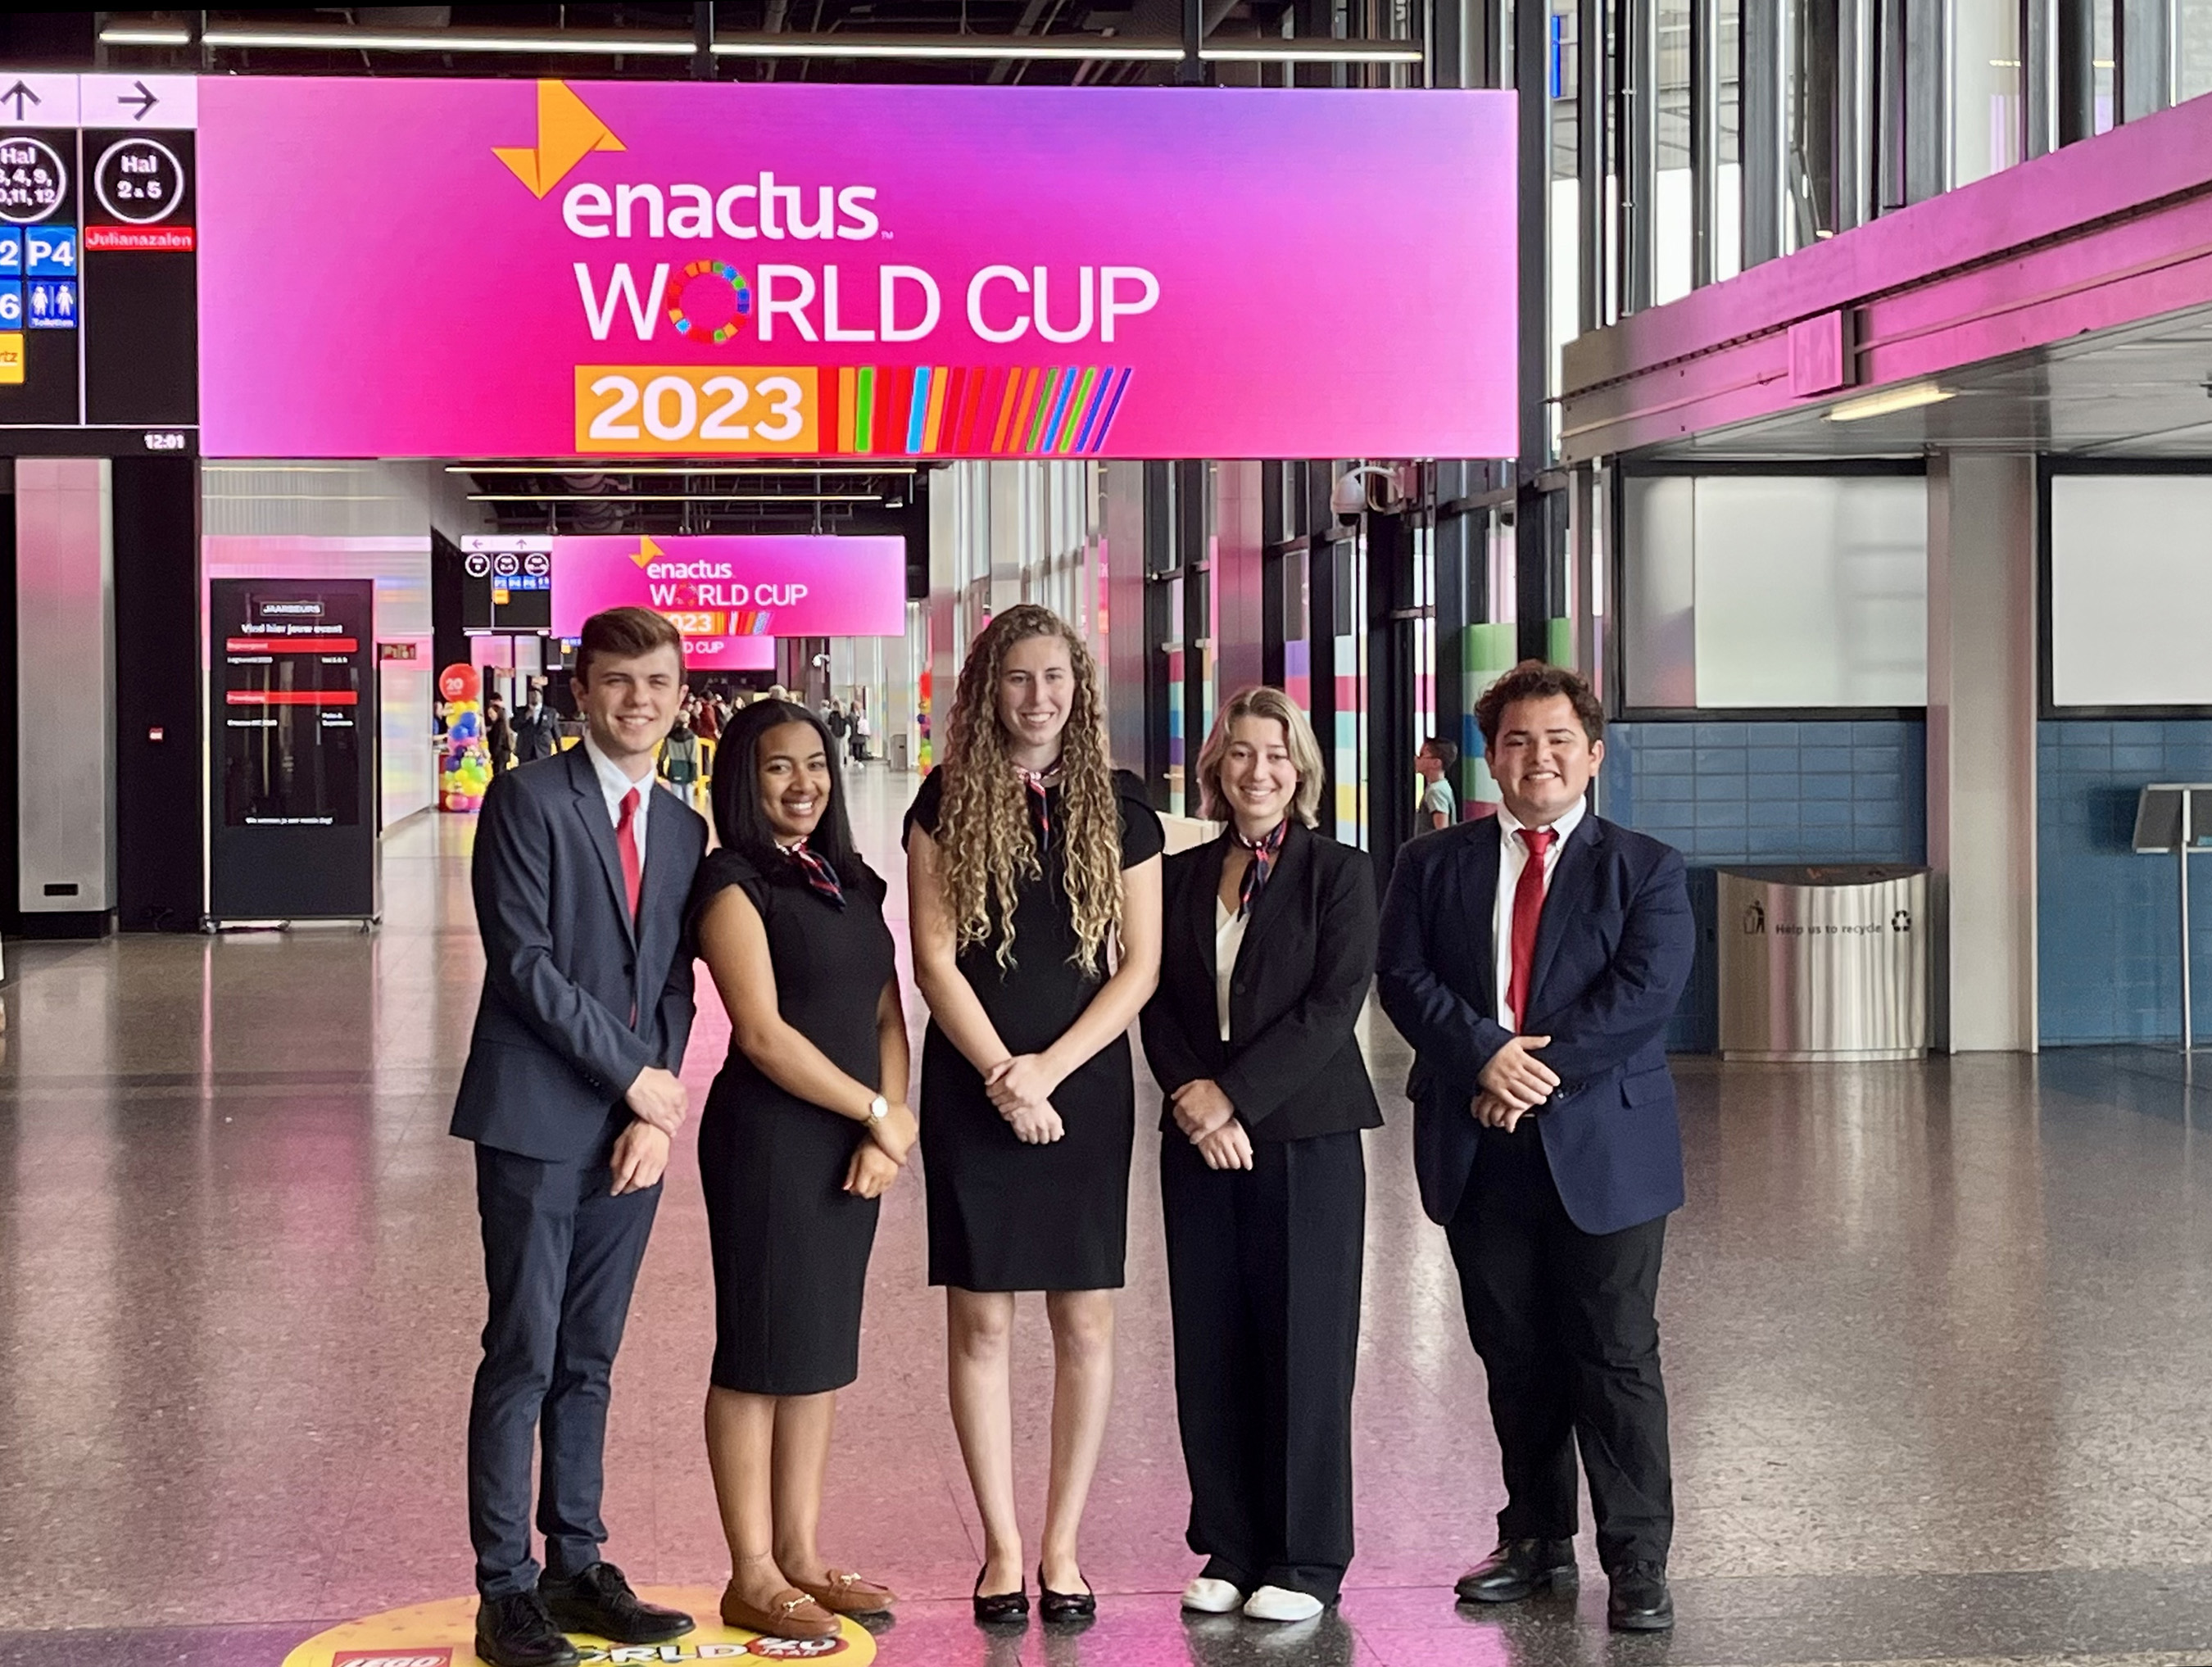 Southern's student Enactus team at the Enactus World Cup